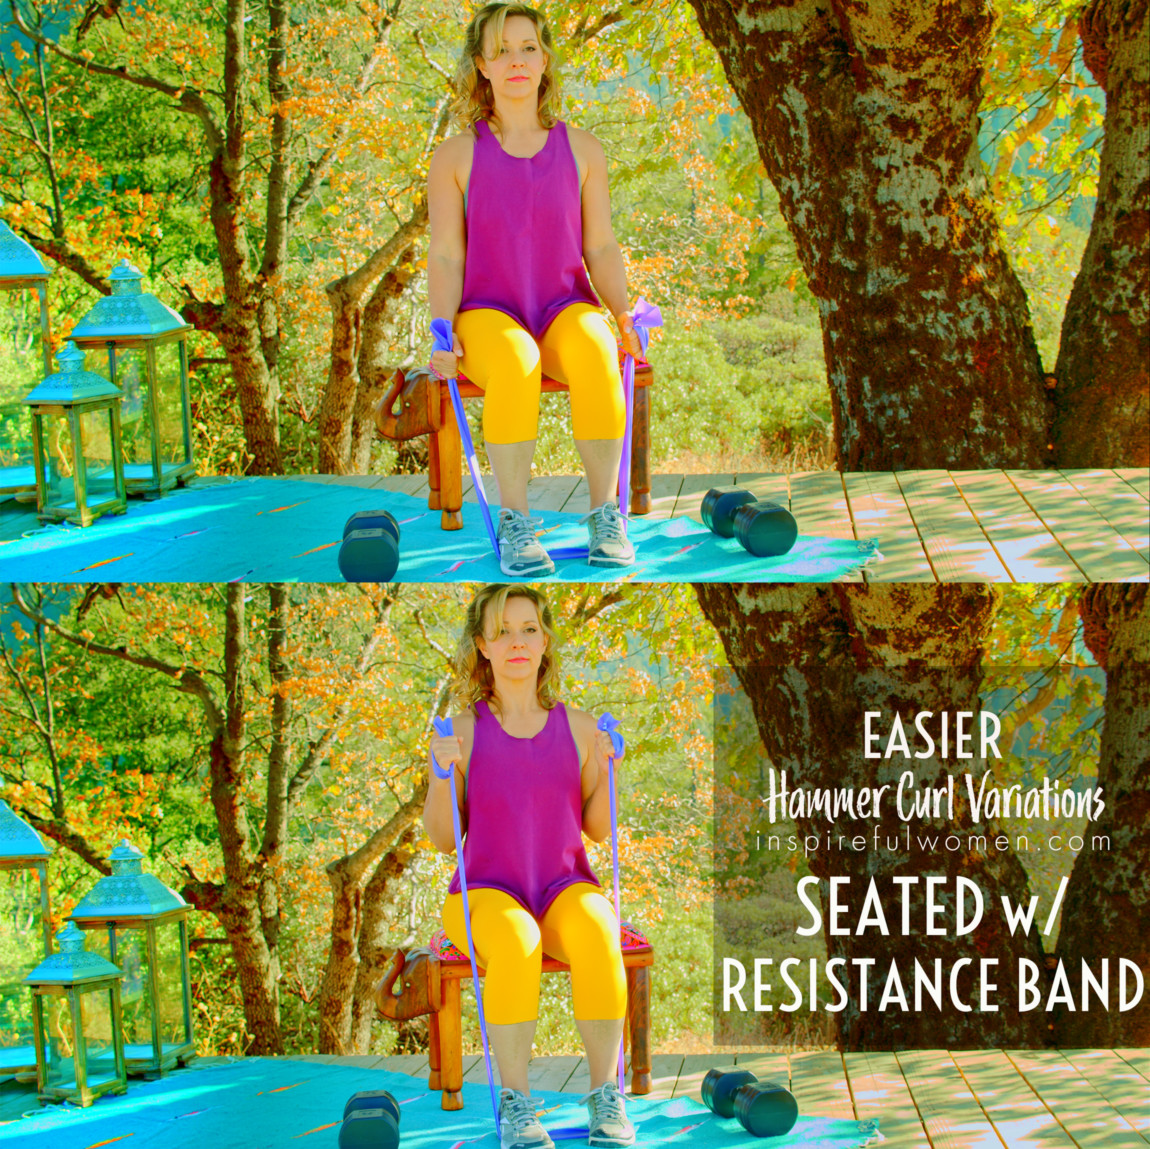 seated-resistance-band-hammer-curl-bicep-muscles-variation-easier